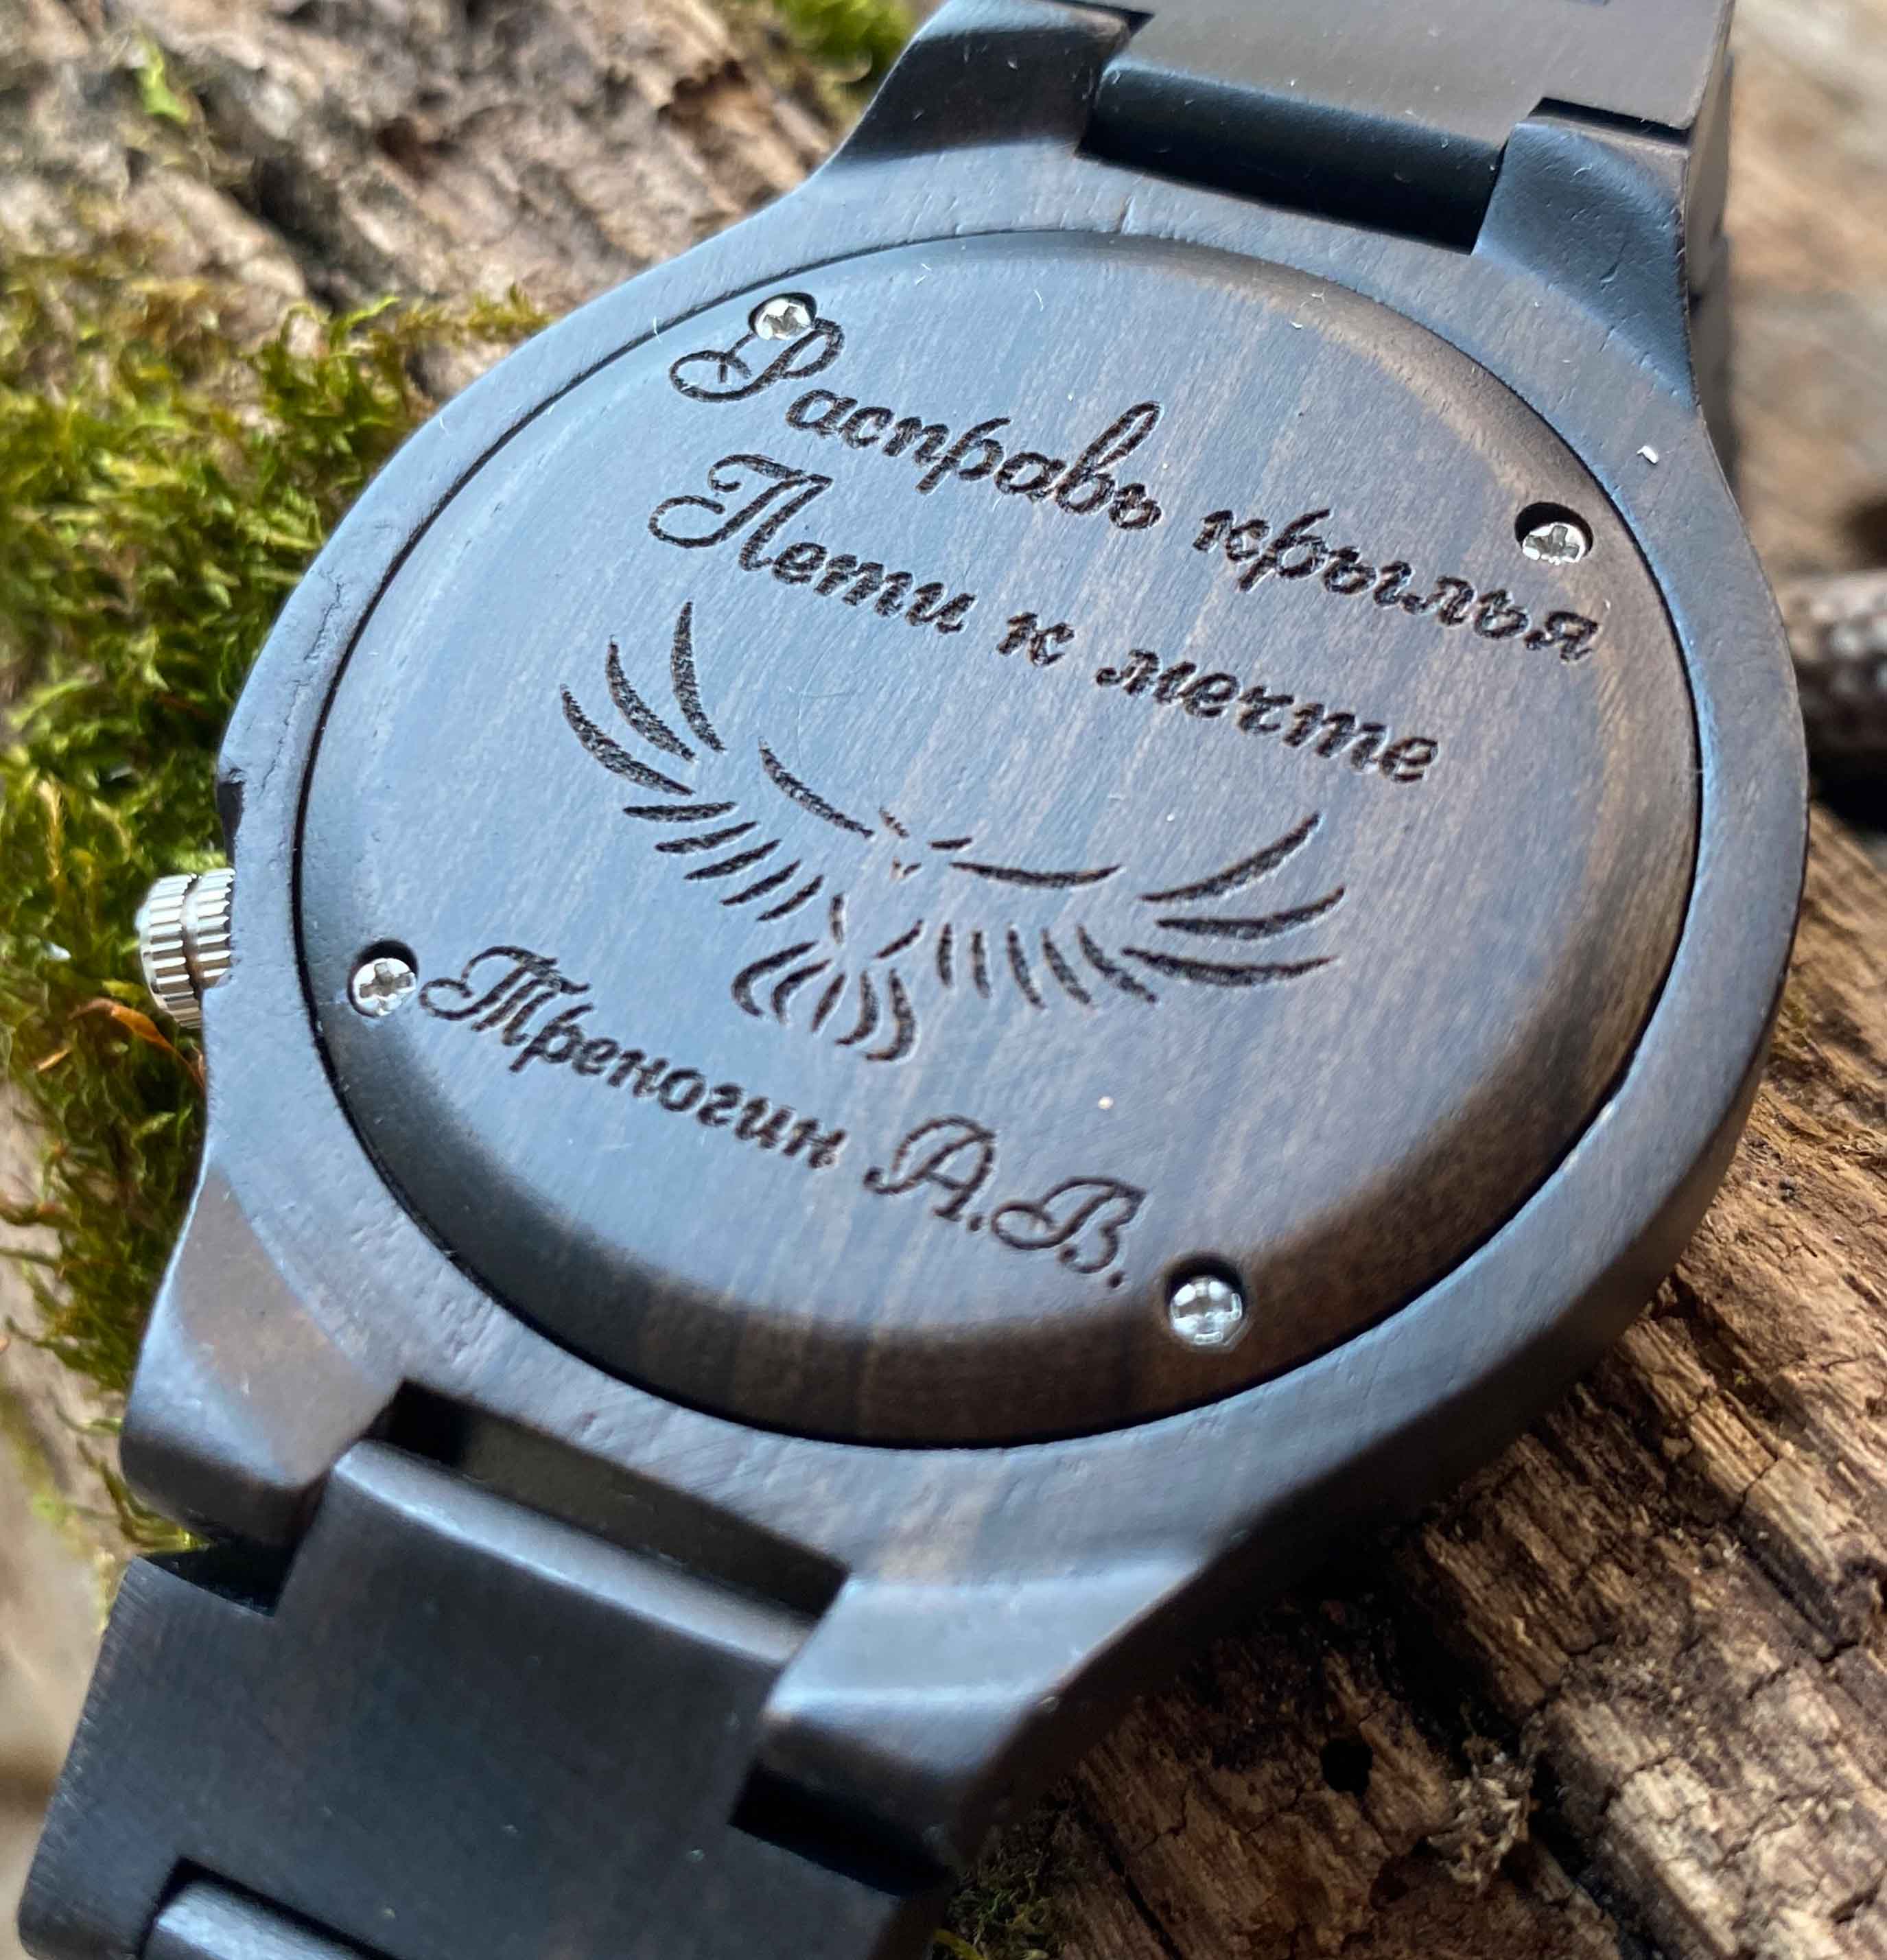 Wooden Watch Elegant New Personalized engraving